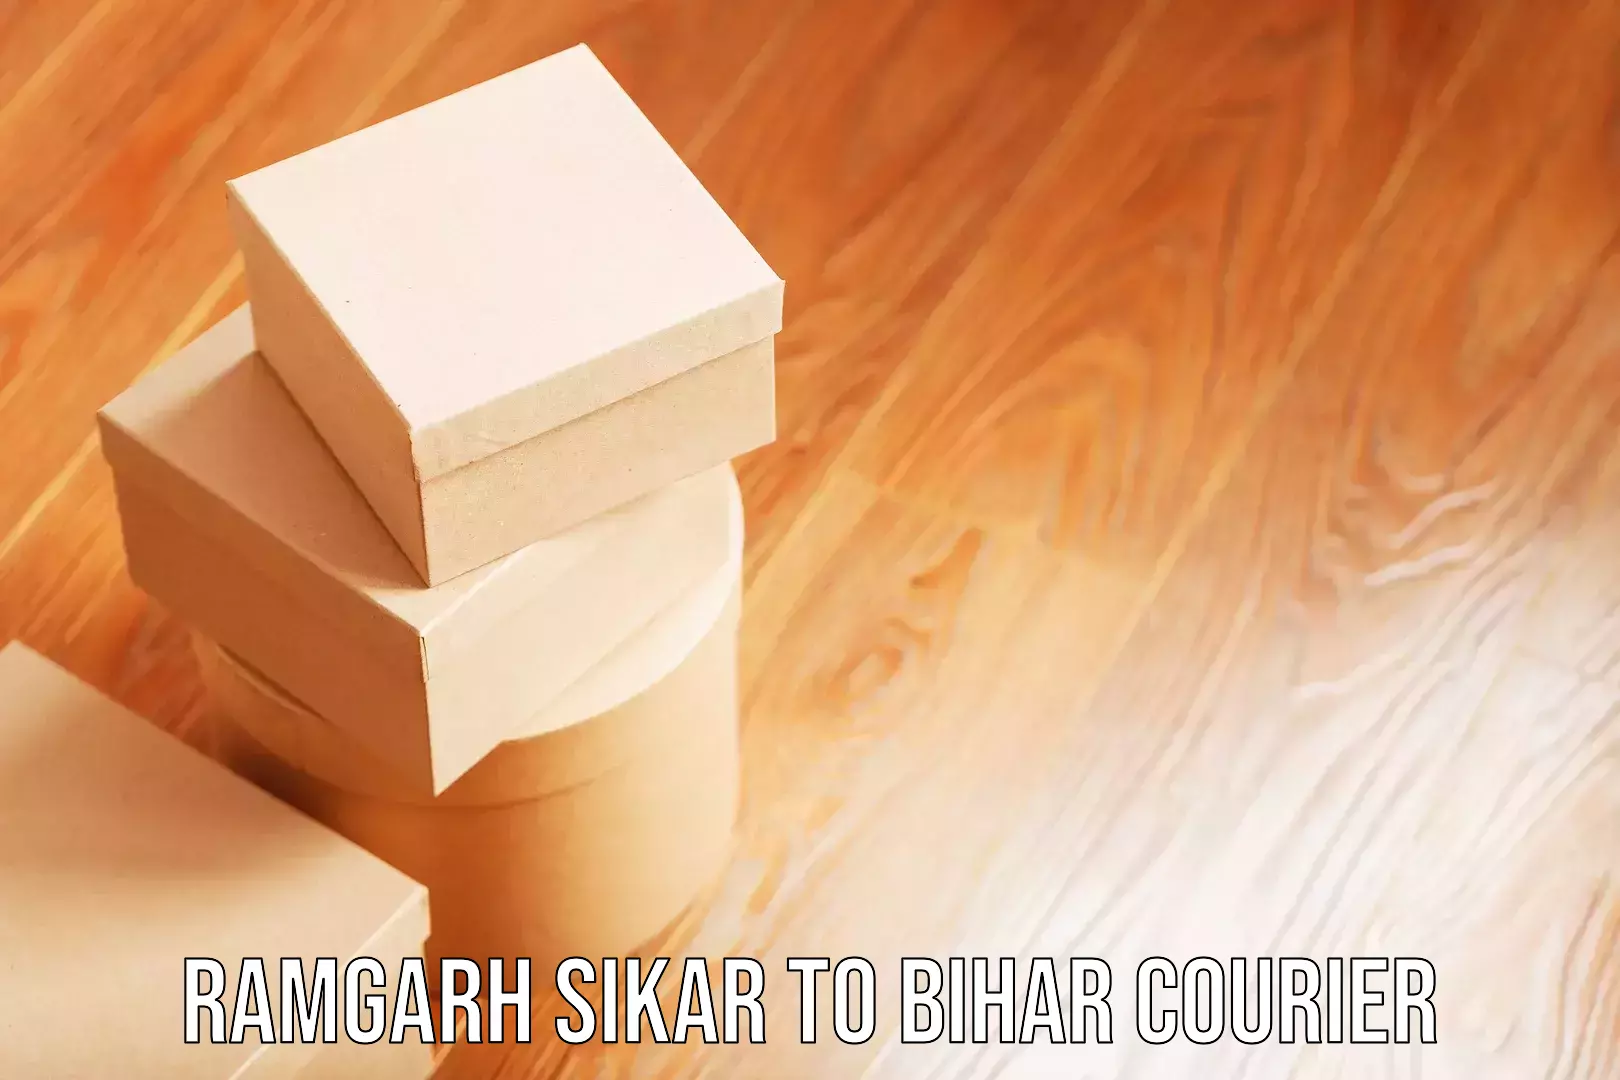 Personal baggage courier Ramgarh Sikar to Maheshkhunt